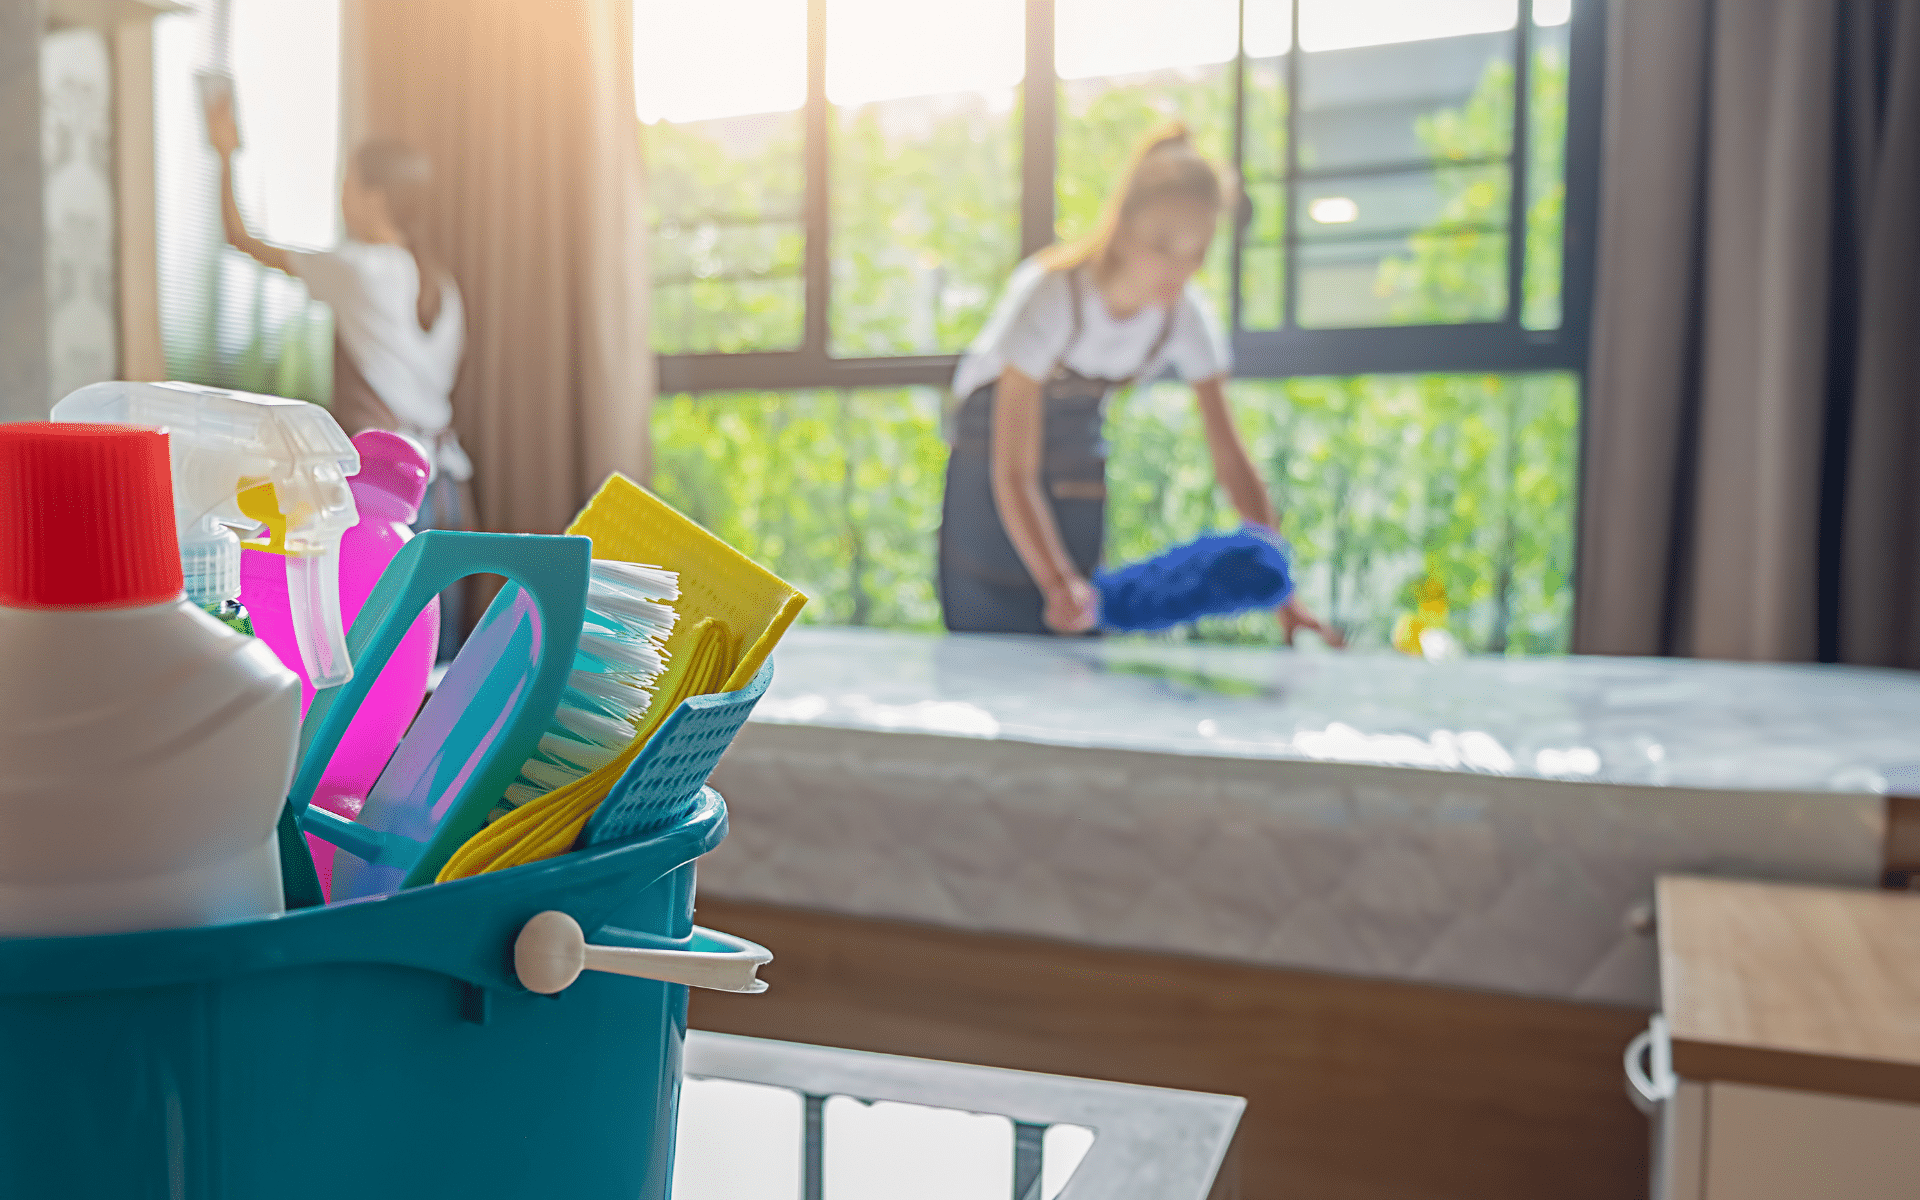 Home Cleaning Services: Questions to Ask Before Hiring One